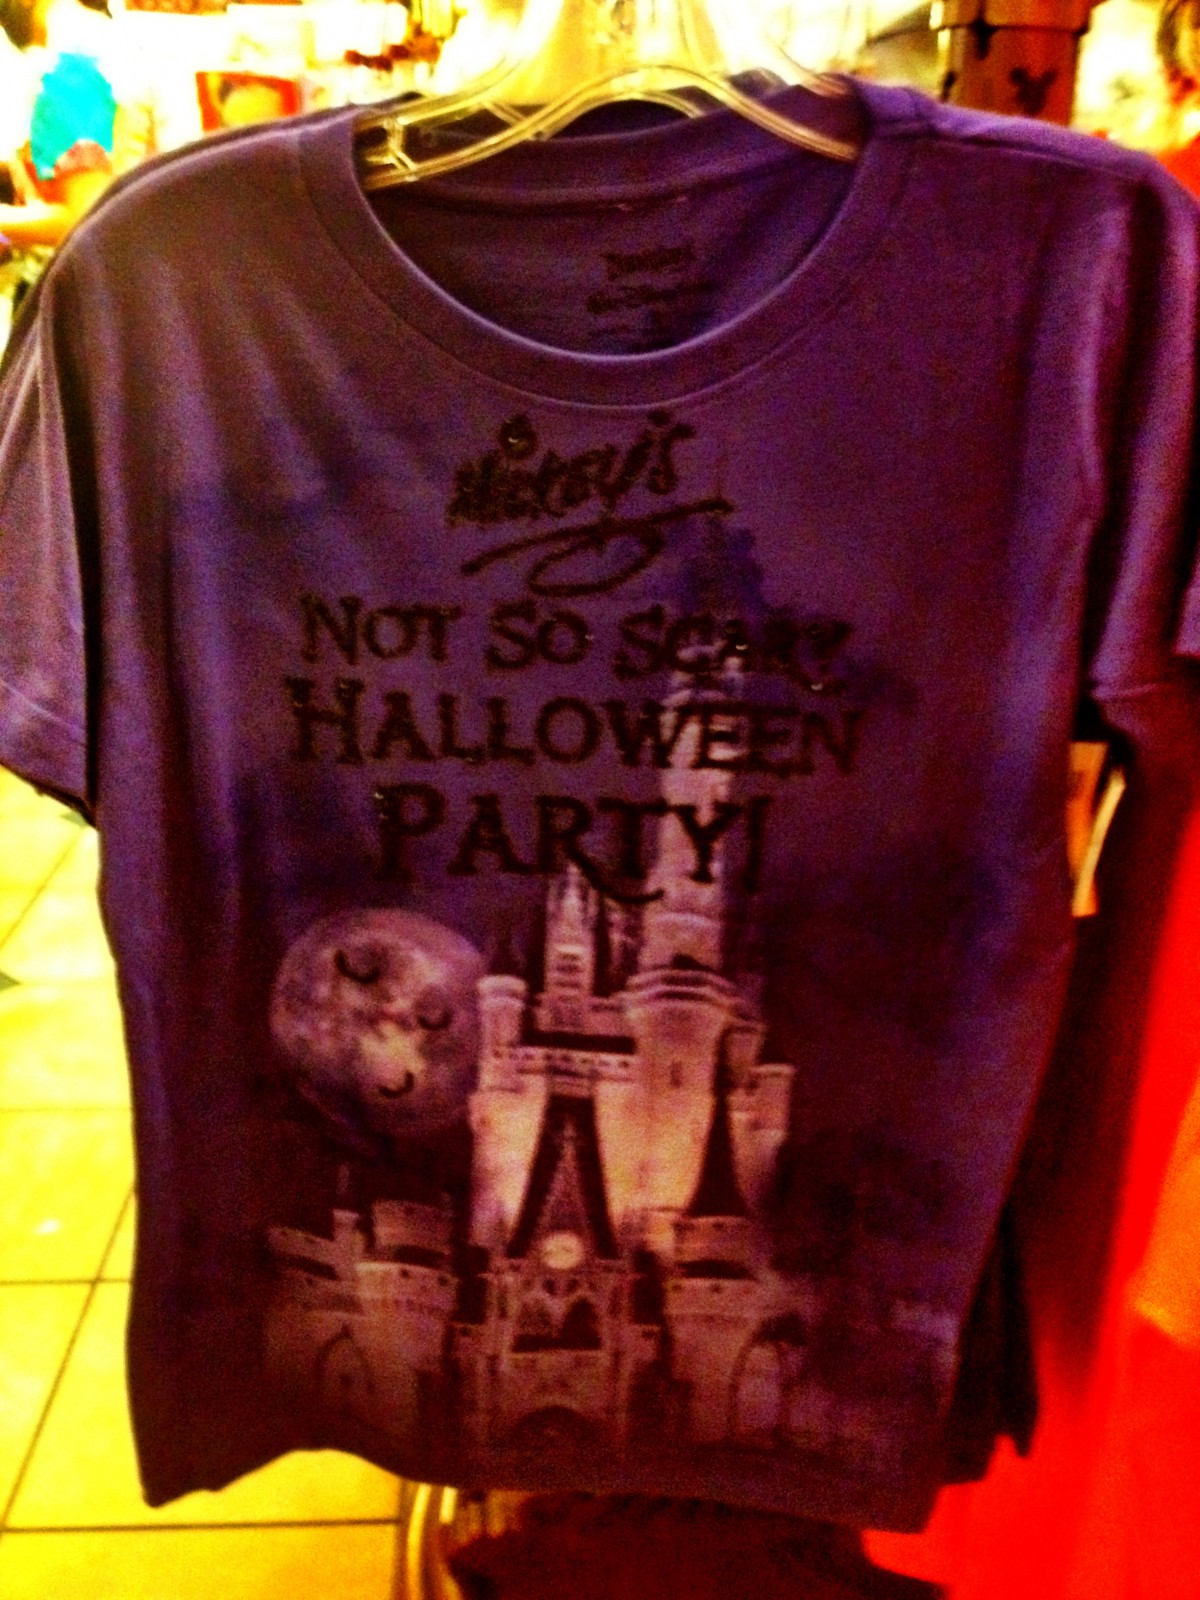 Mickey's Not So Scary Halloween Party Merchandise - Women's Shirt - $31.95